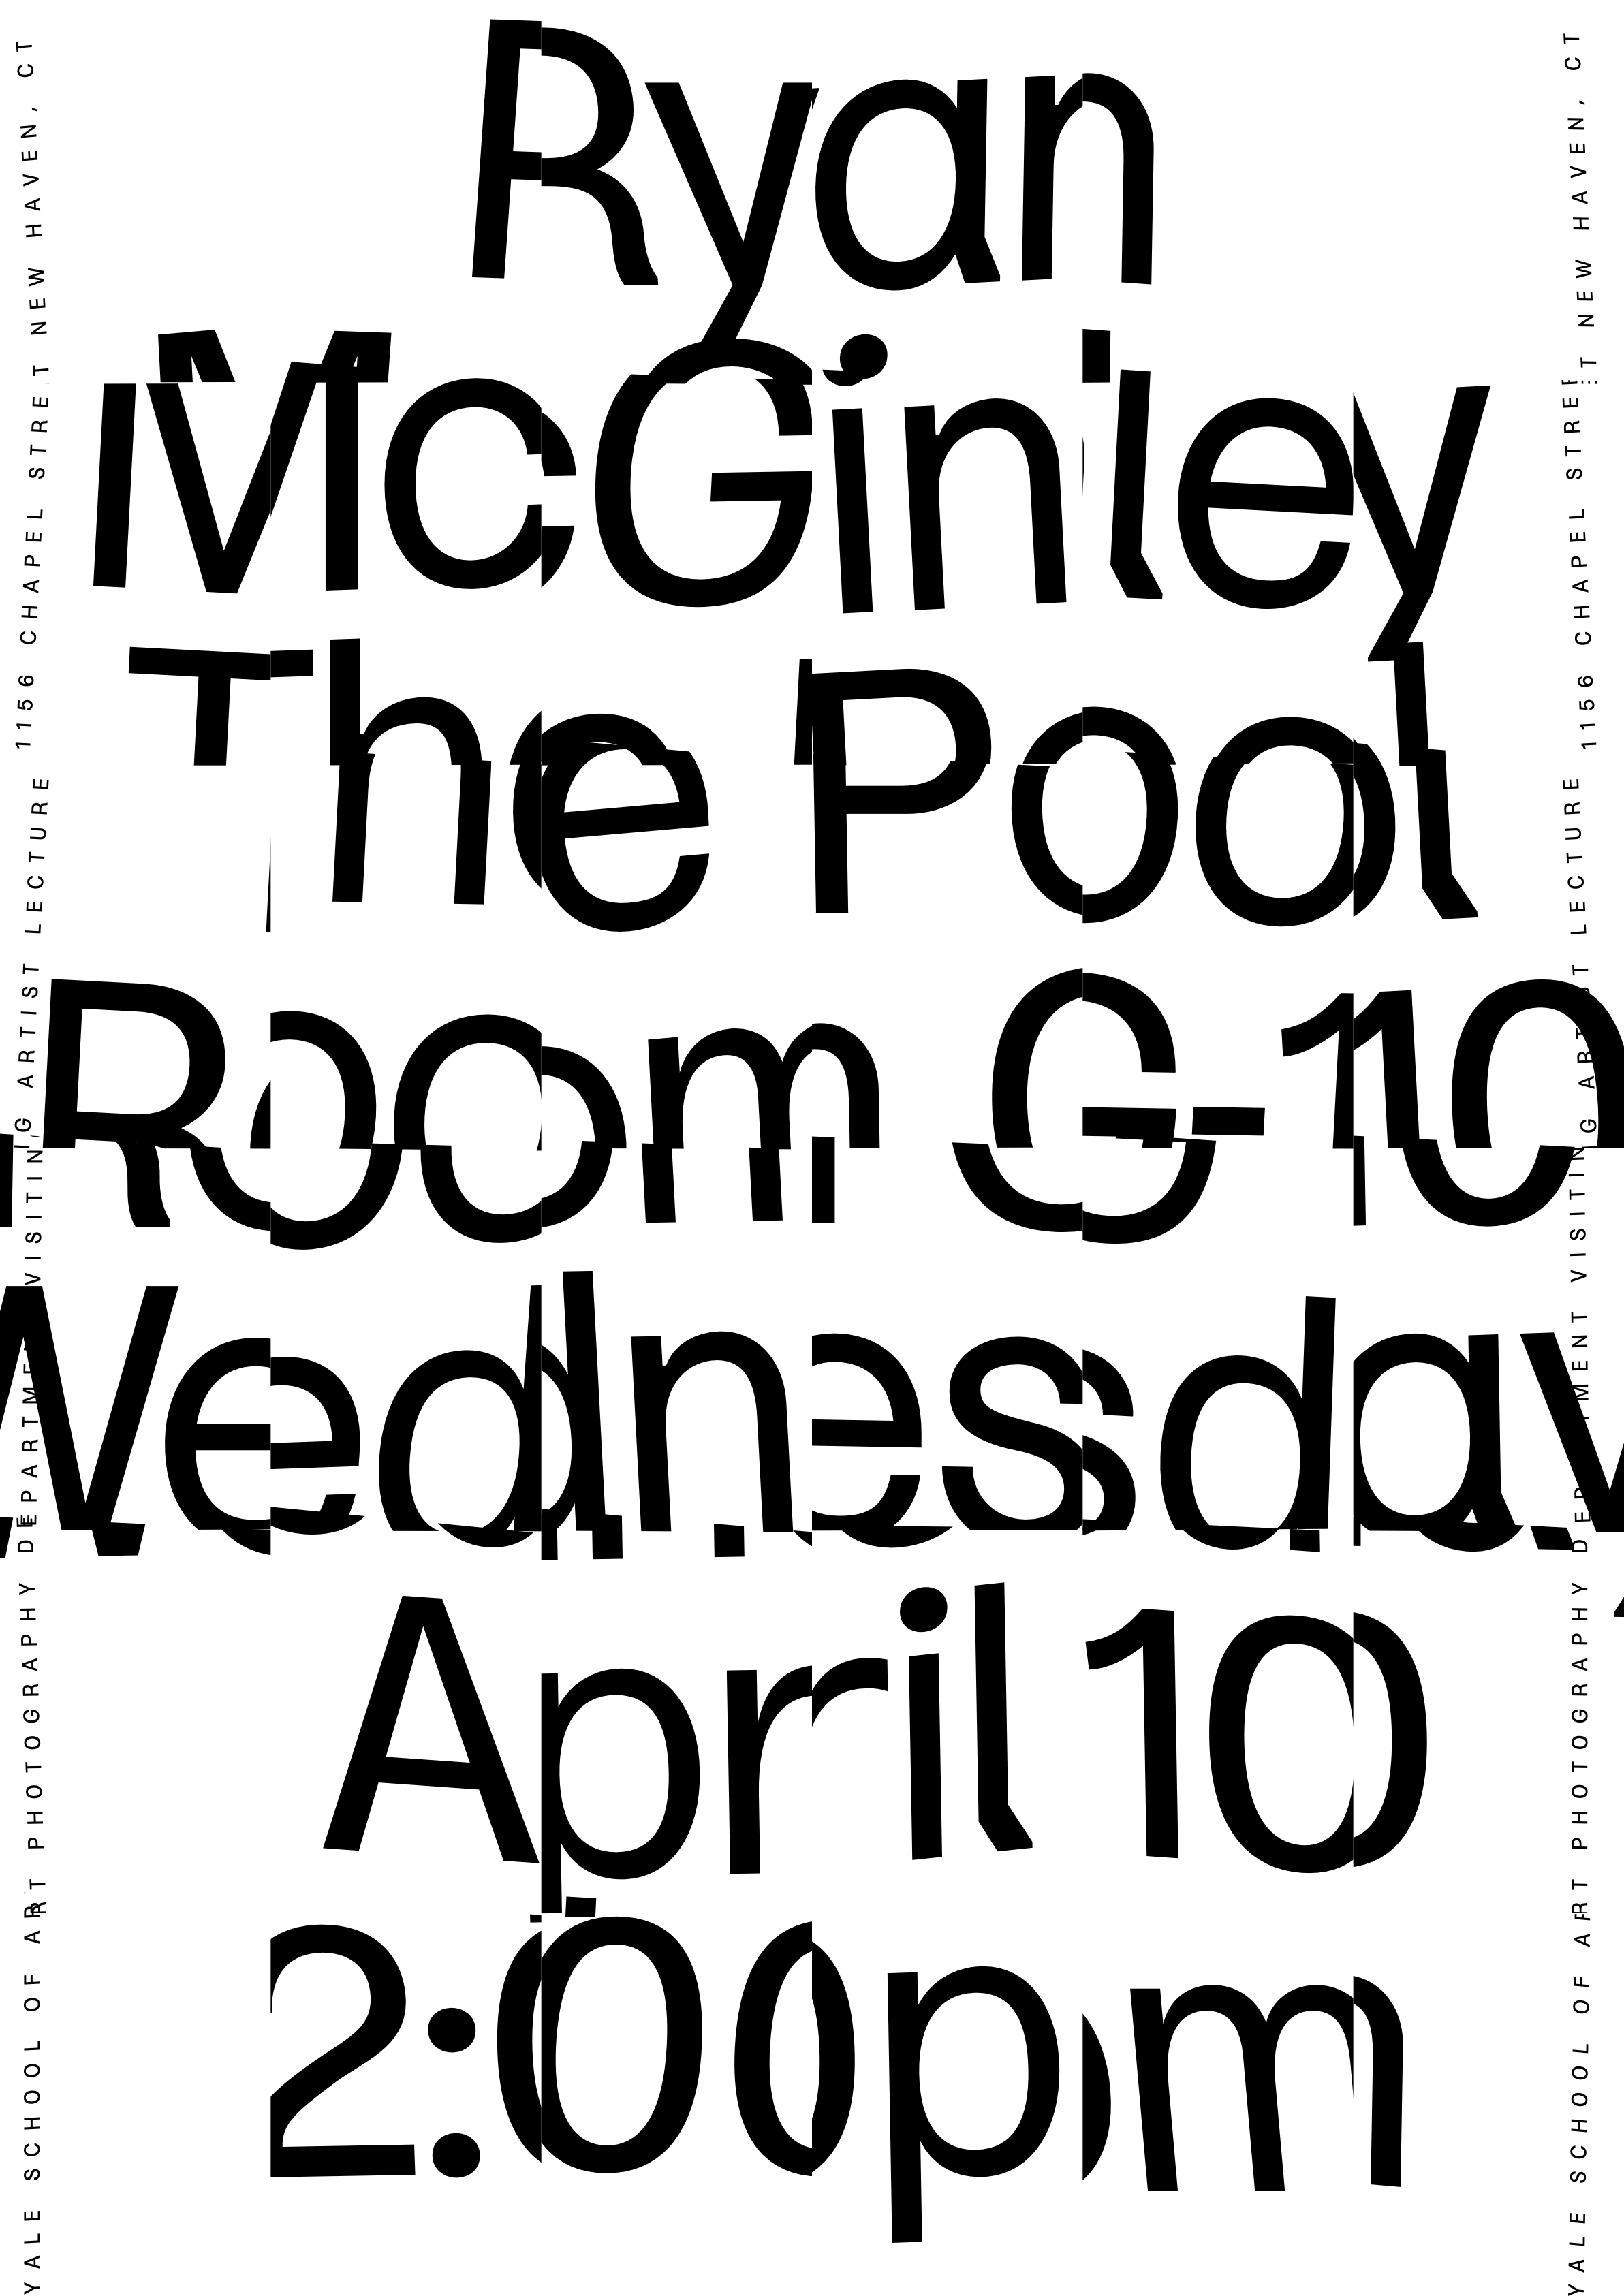 McGinley Poster sample